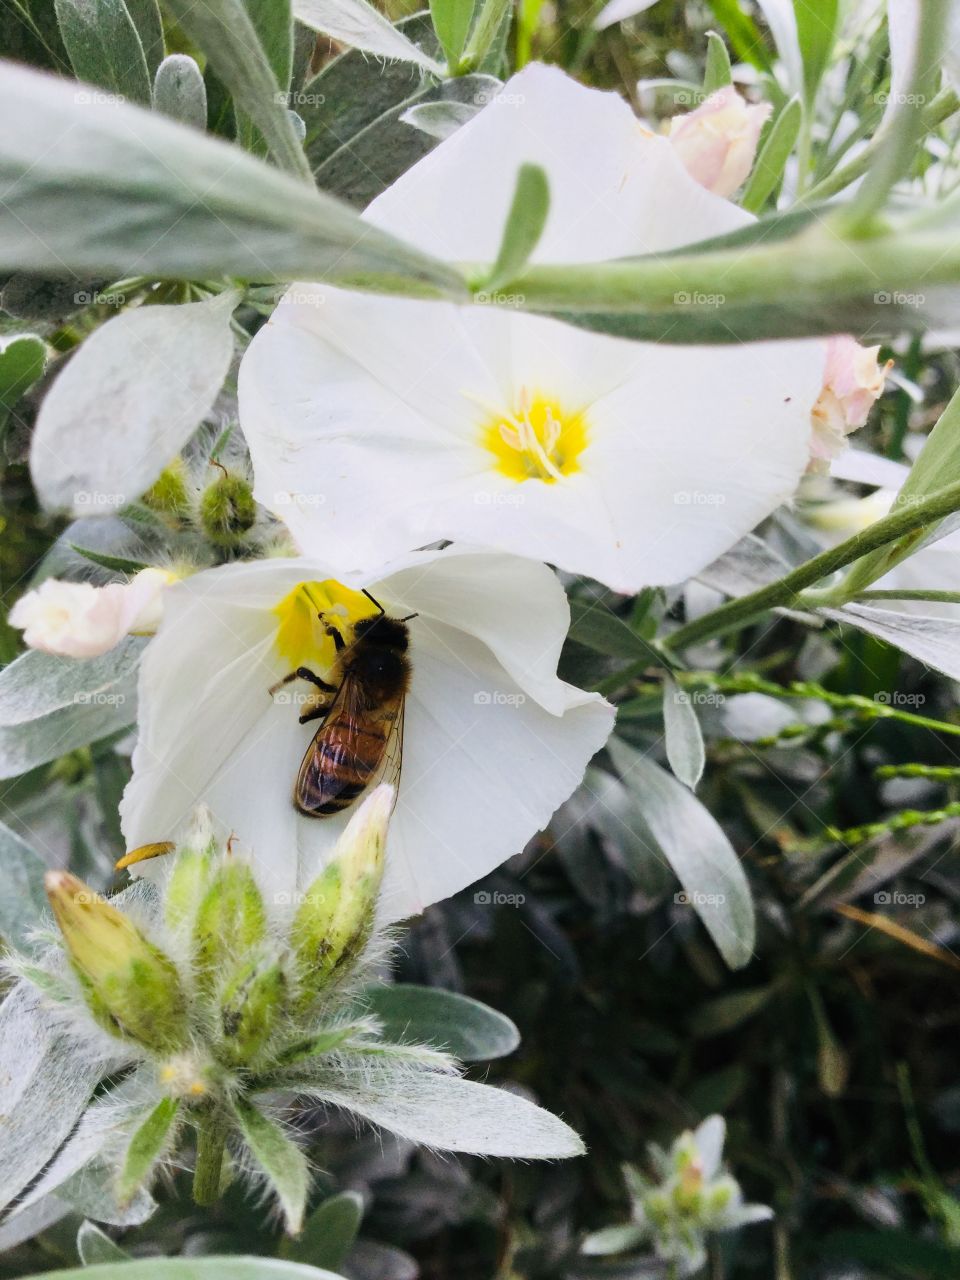 This is a photo of a bee in a white flower with a yellow middle. There are dark green leaves around the flowers.